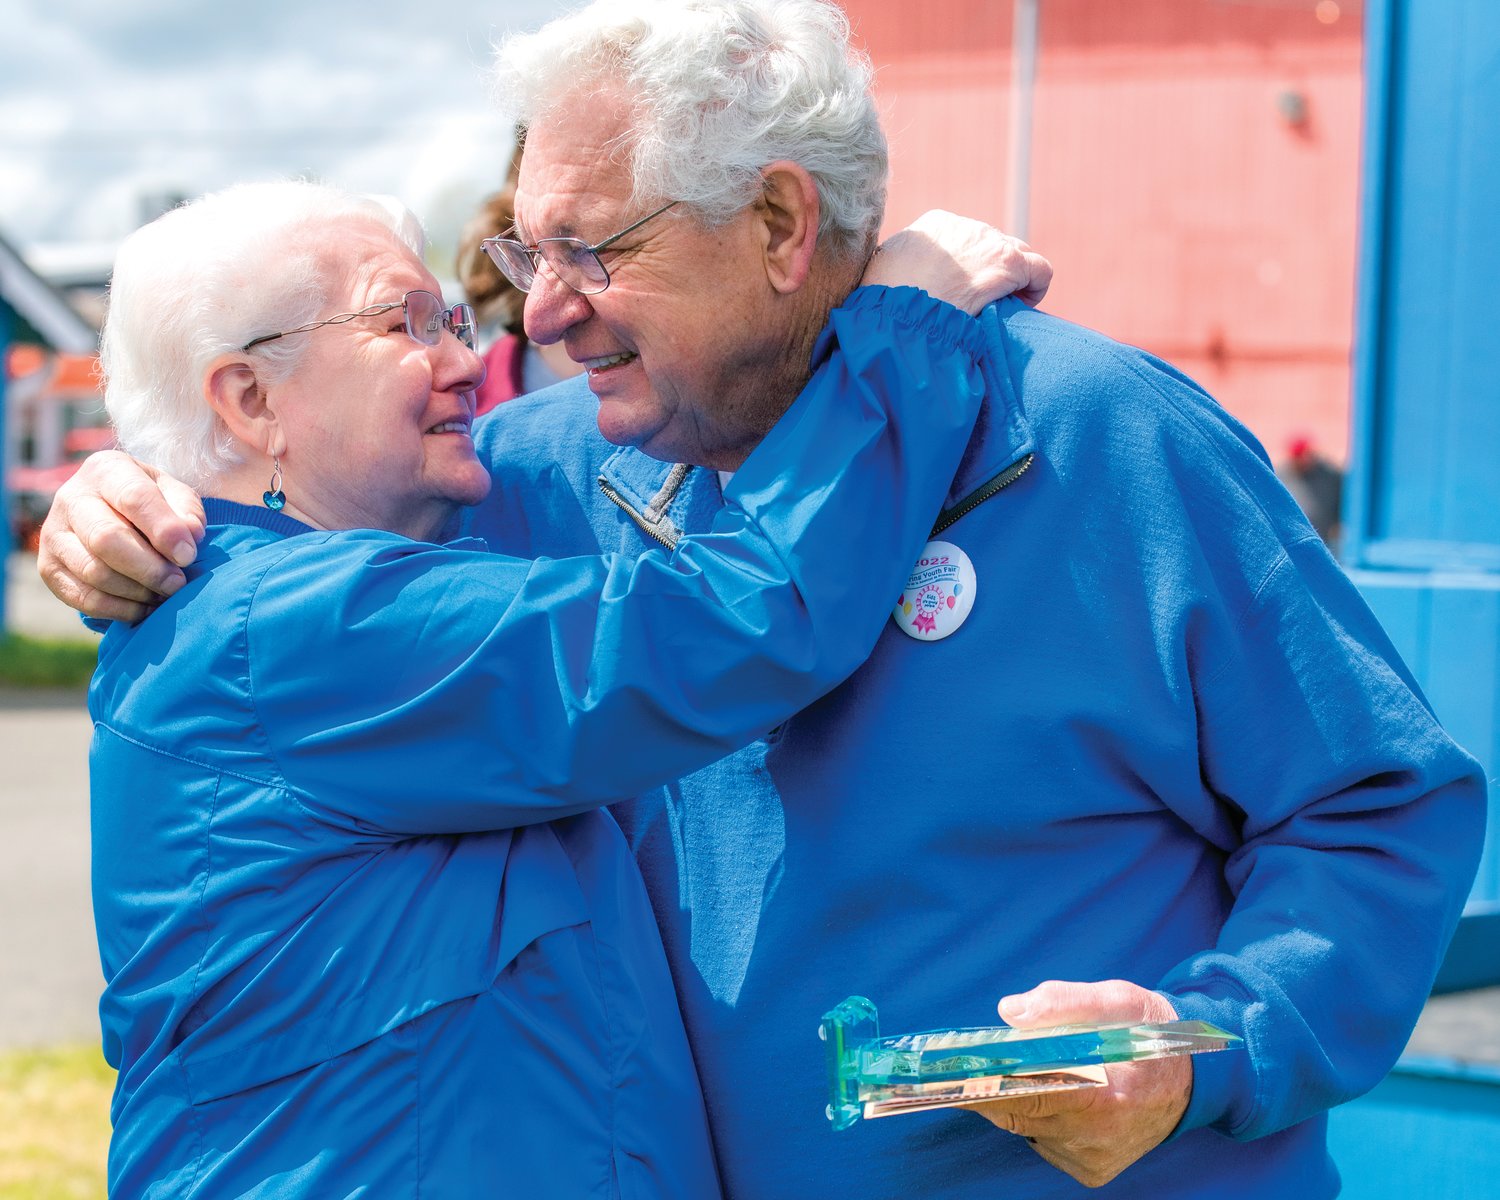 Lee Coumbs smiles and hugs his wife, Bonnie, after receiving a surprise award for 40 years of service Sunday during the Spring Youth Fair in Centralia.